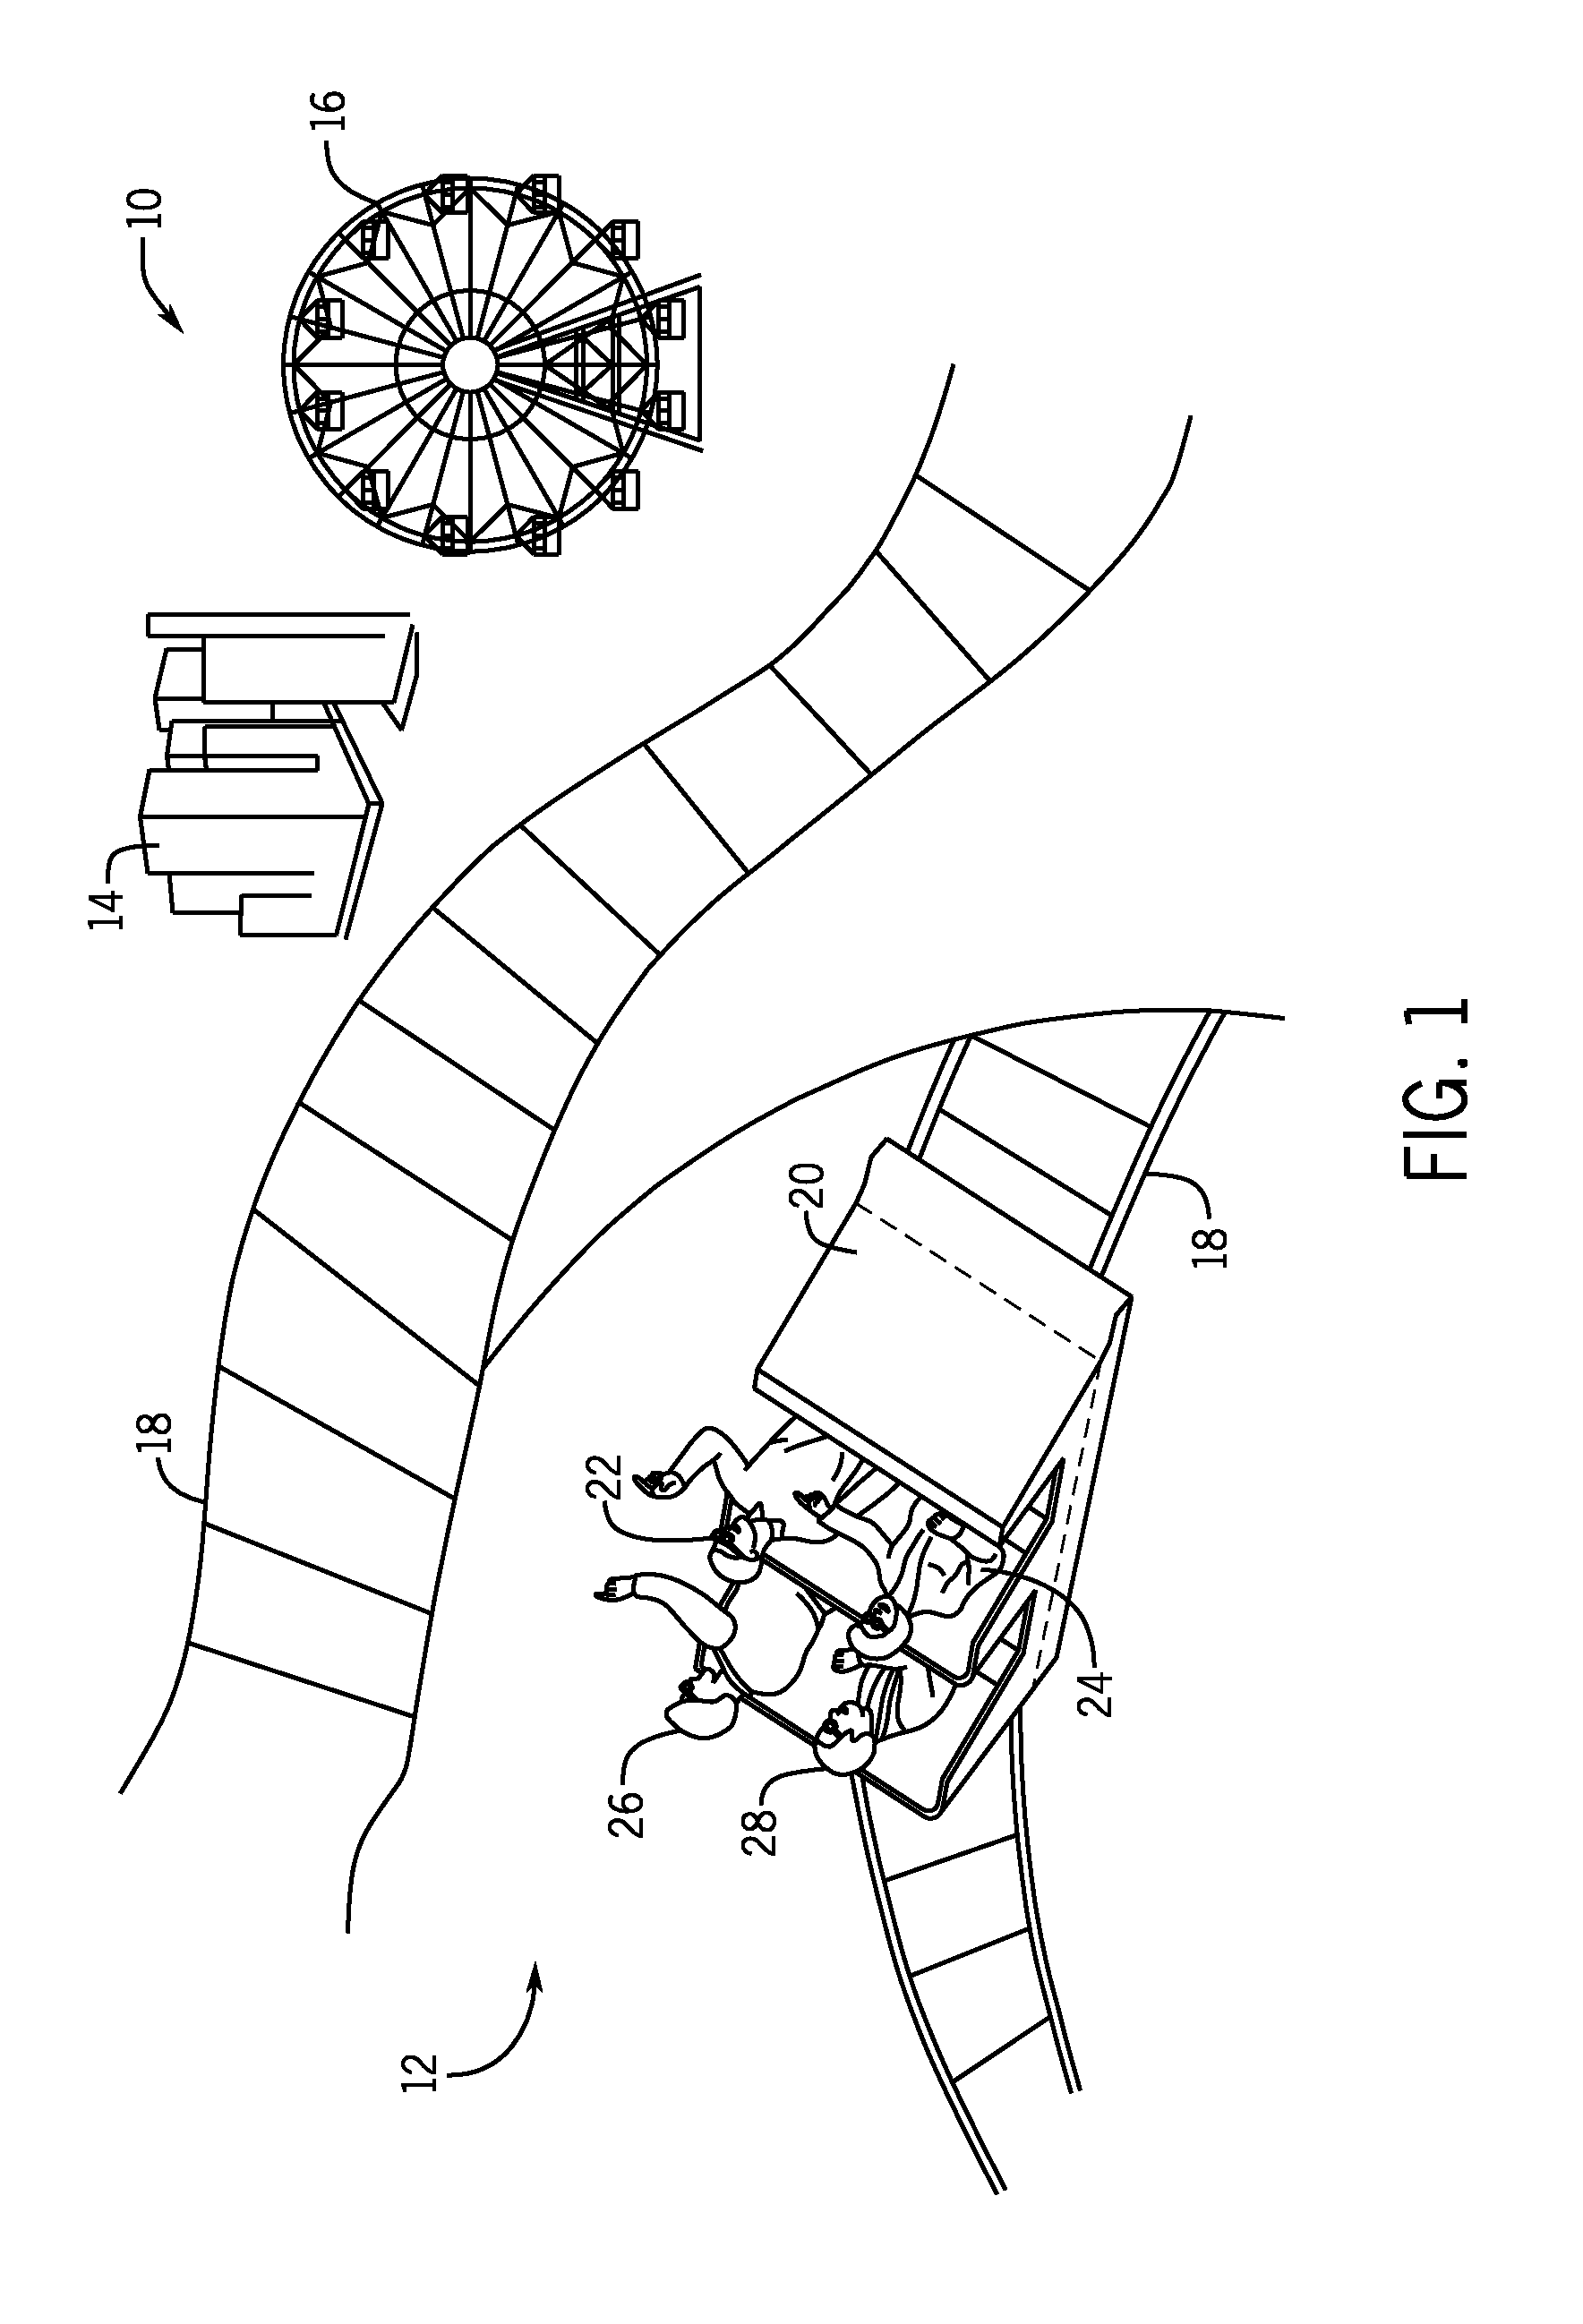 Systems and methods for generating augmented and virtual reality images